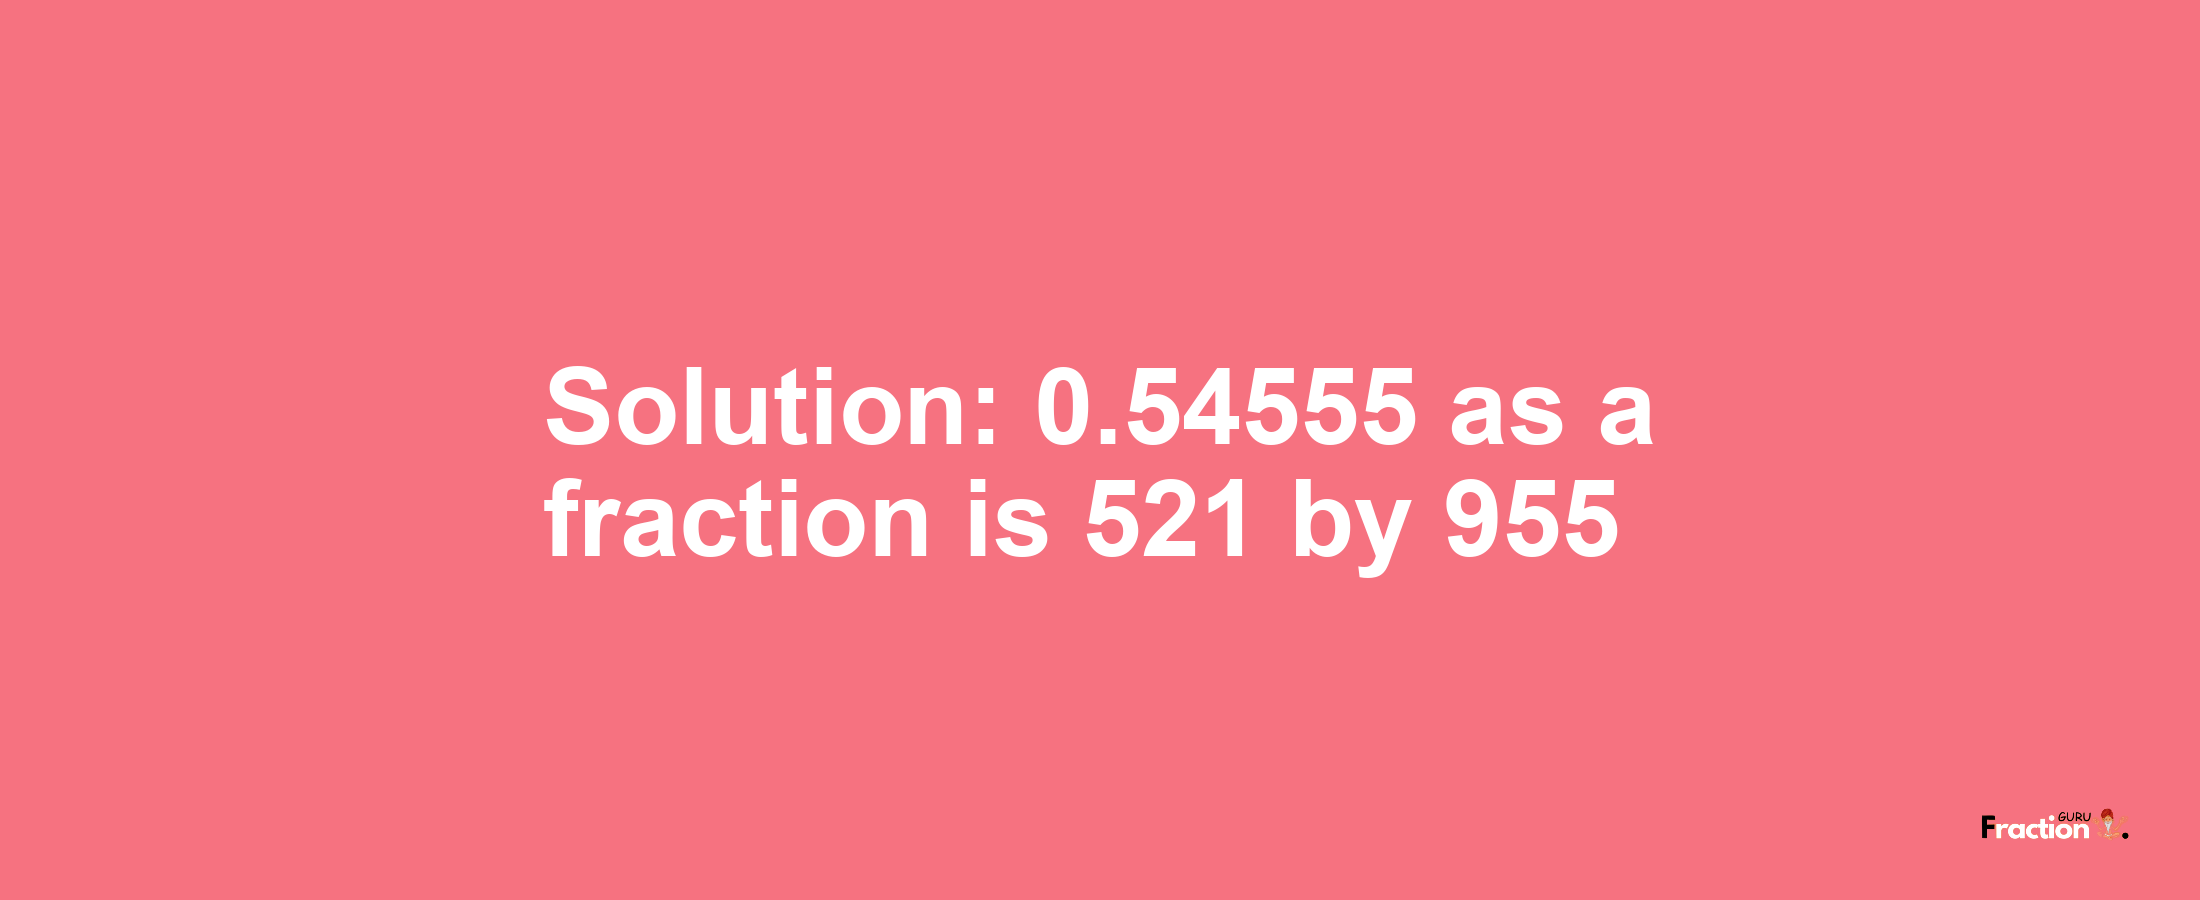 Solution:0.54555 as a fraction is 521/955